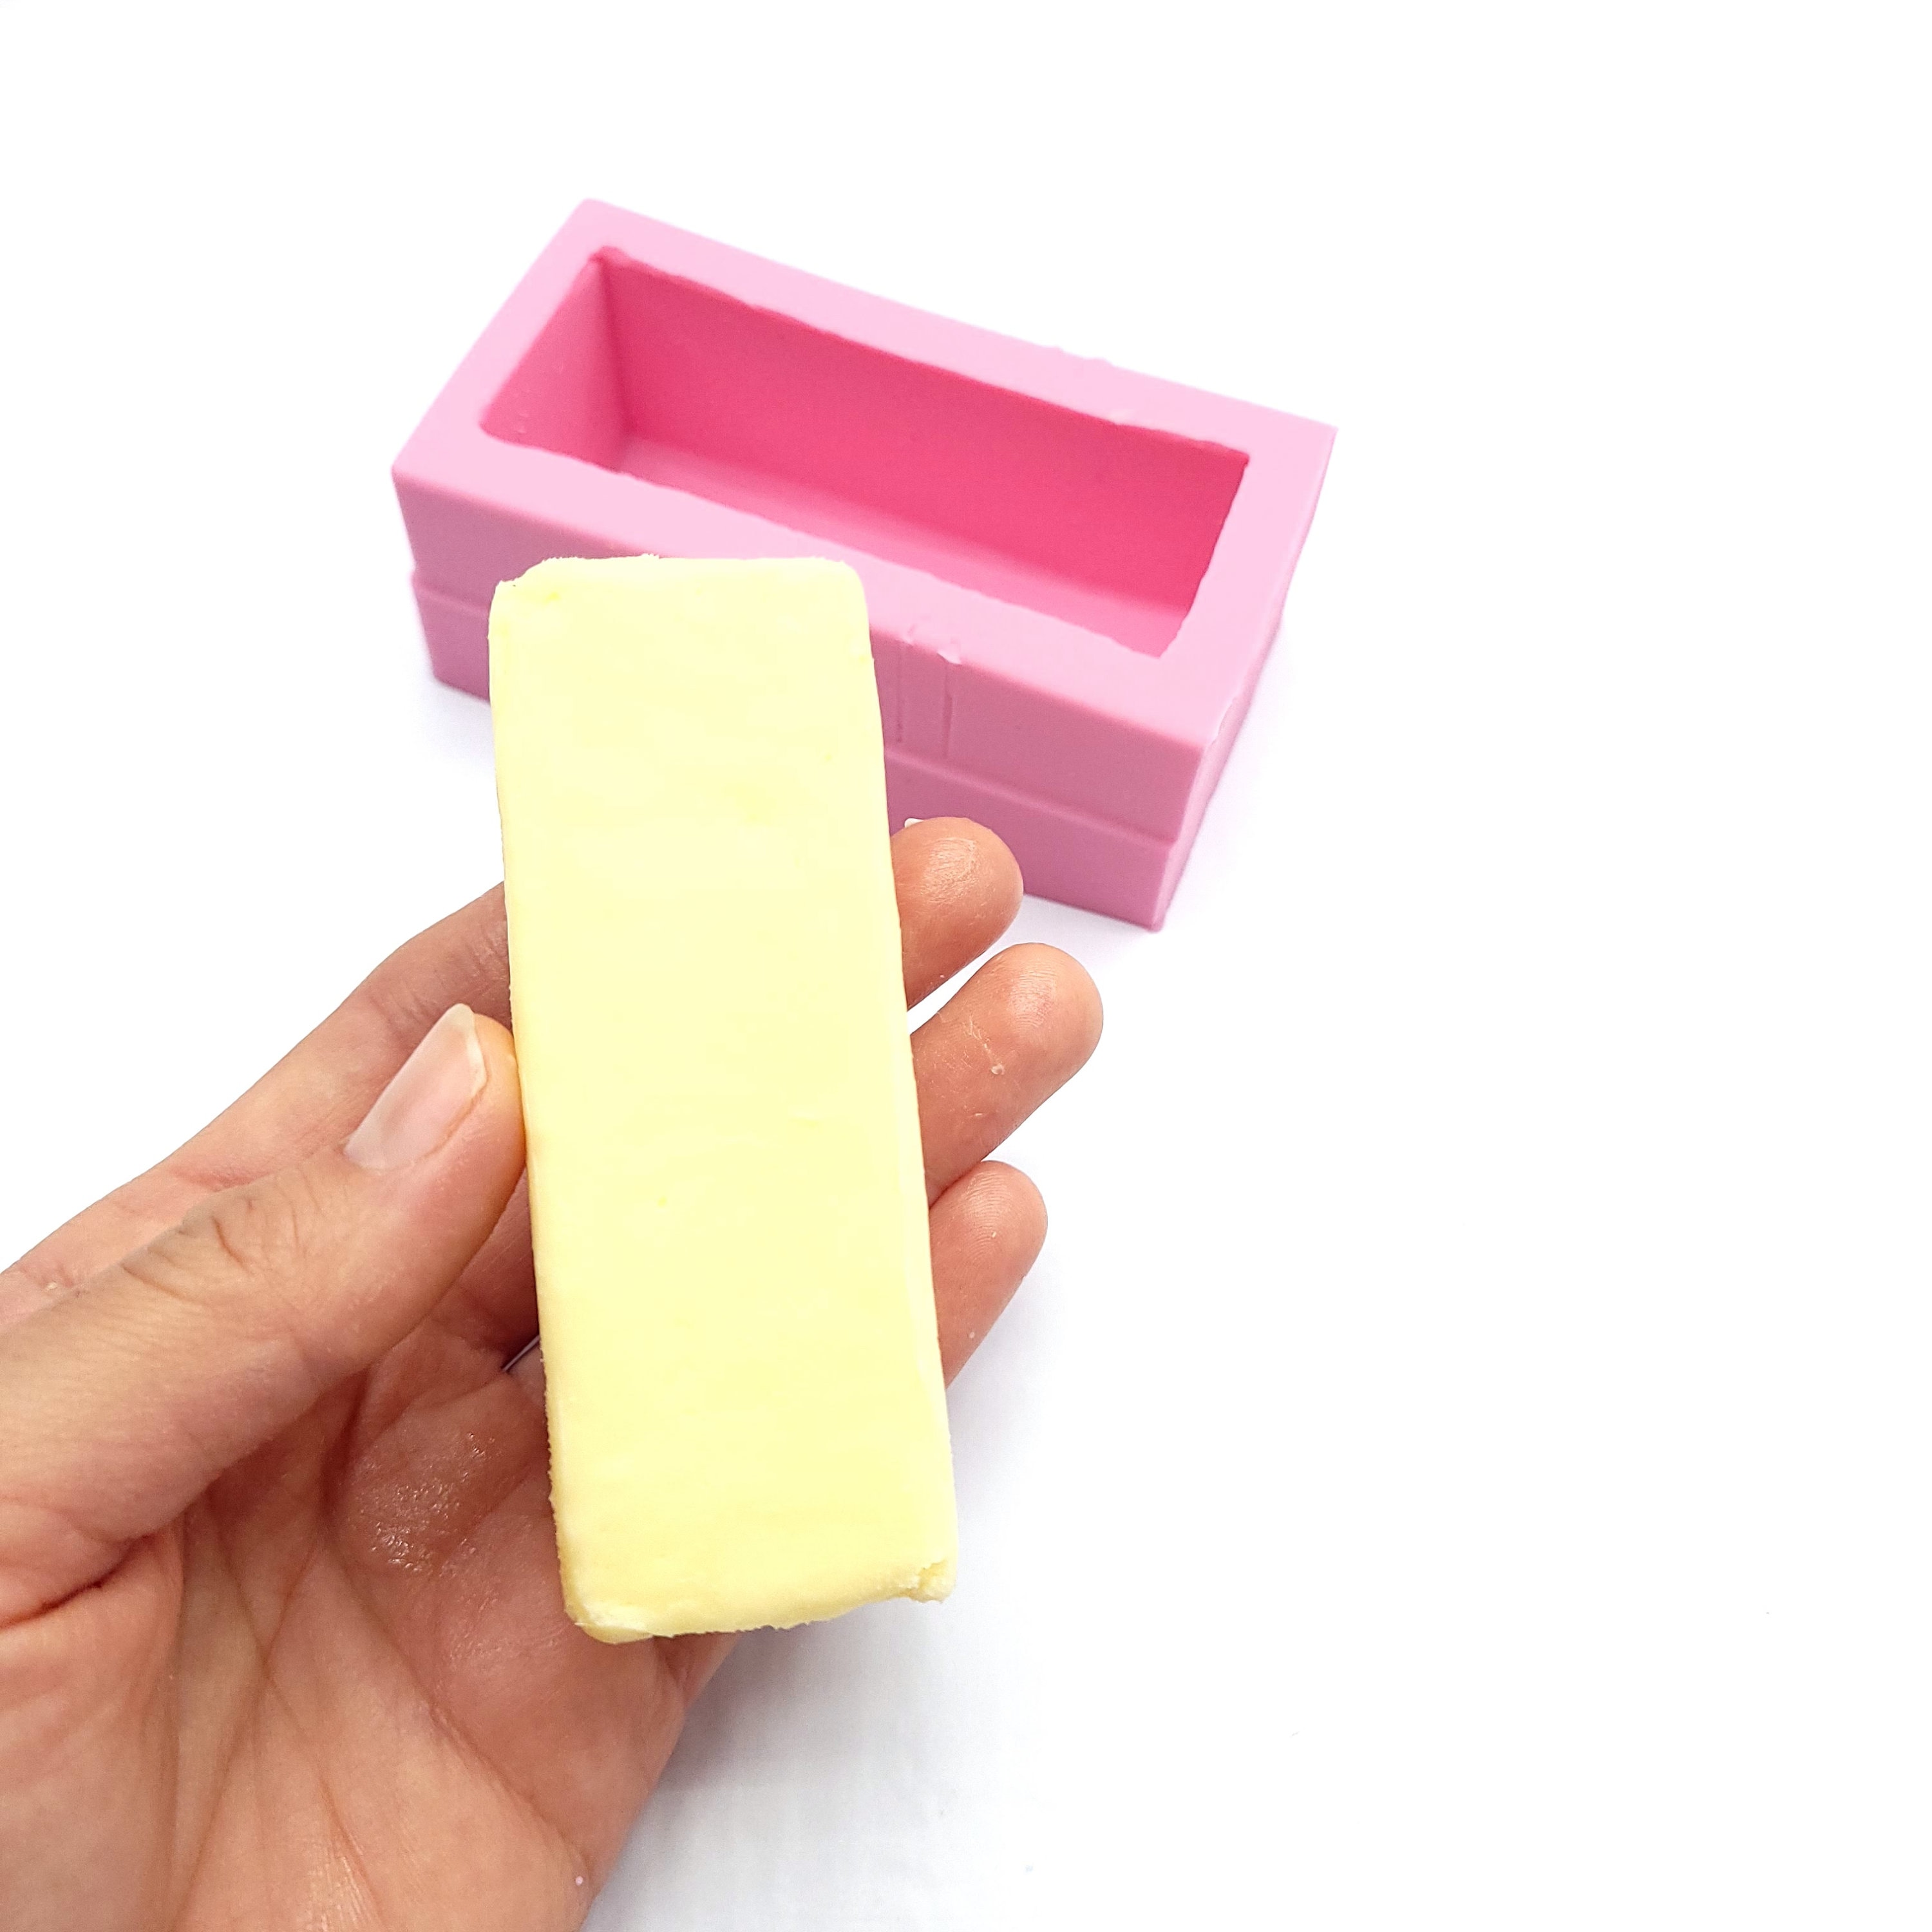 BUTTER STICK MOLDS POP OUT EASILY: It Is Made With The Best Silicone And  Polished From Inside Which Helps Pop Out Butter Sticks Easily And Also  Makes The